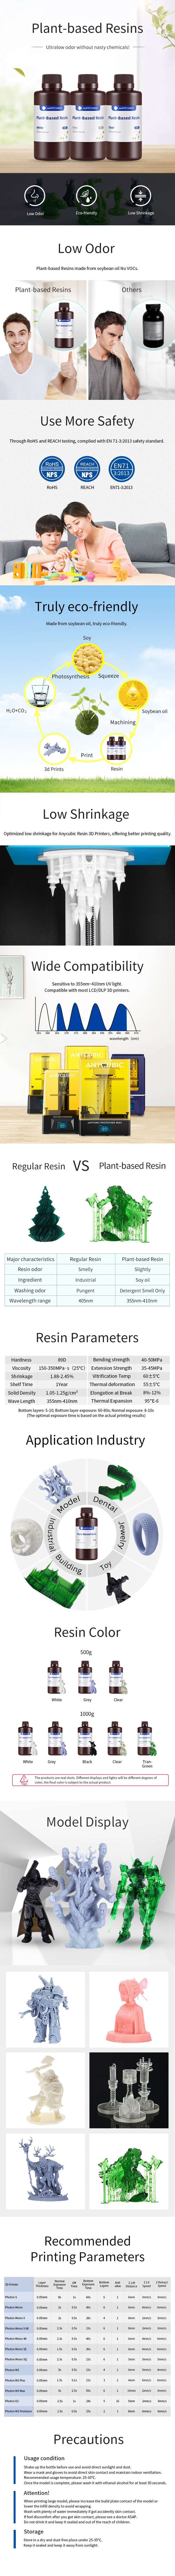 Anycubic Plant-based Resin